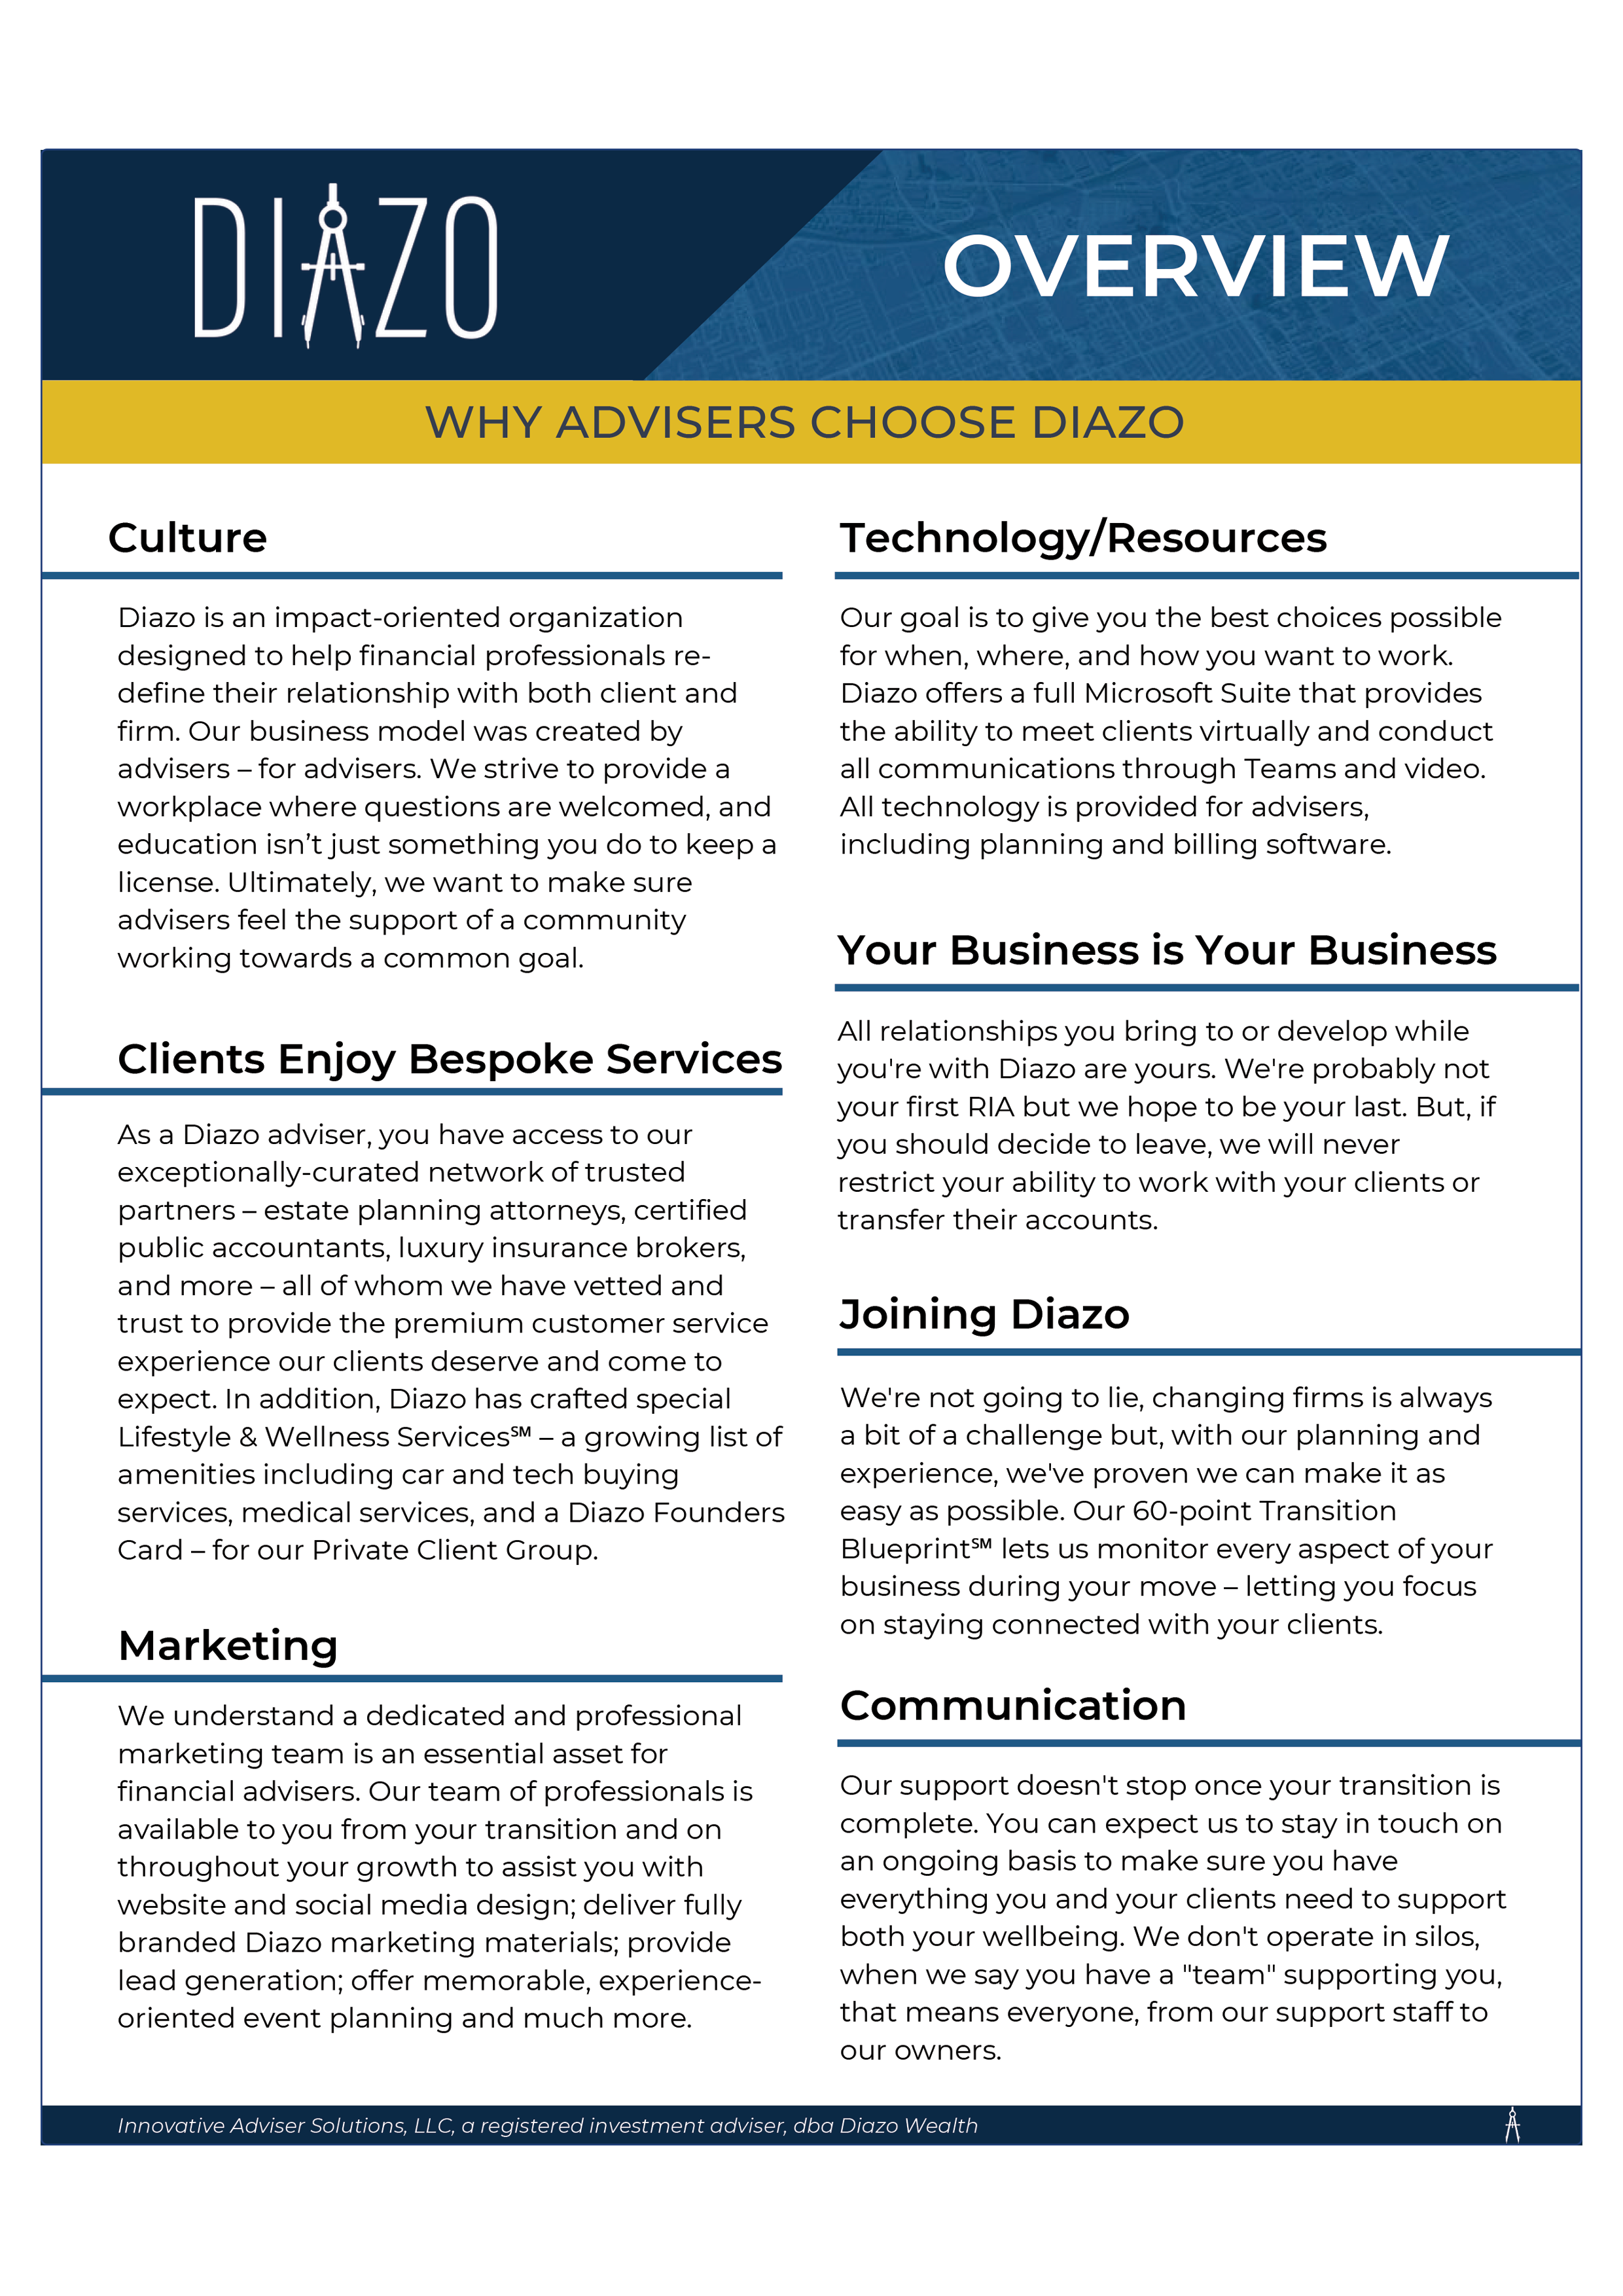  Why Advisers  Choose Diazo  One-Pager